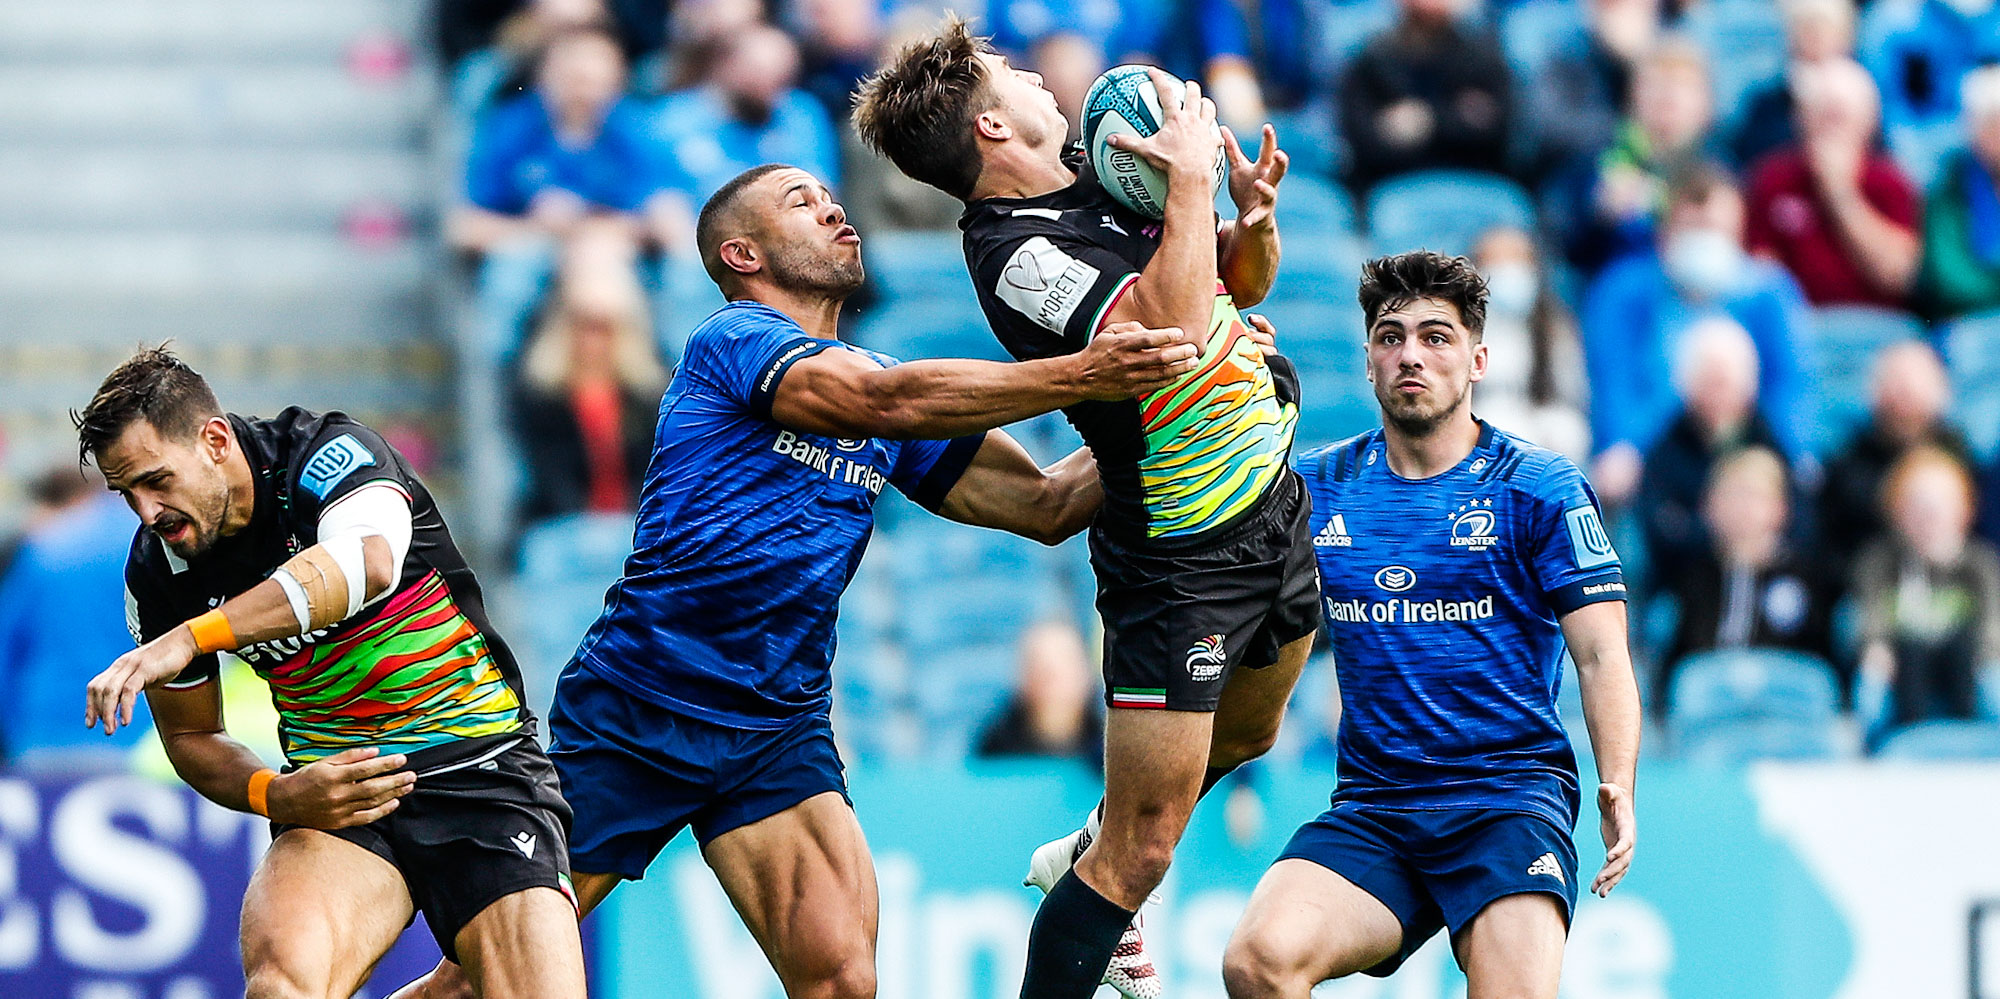 Zebre Parma in action against Leinster in 2021.